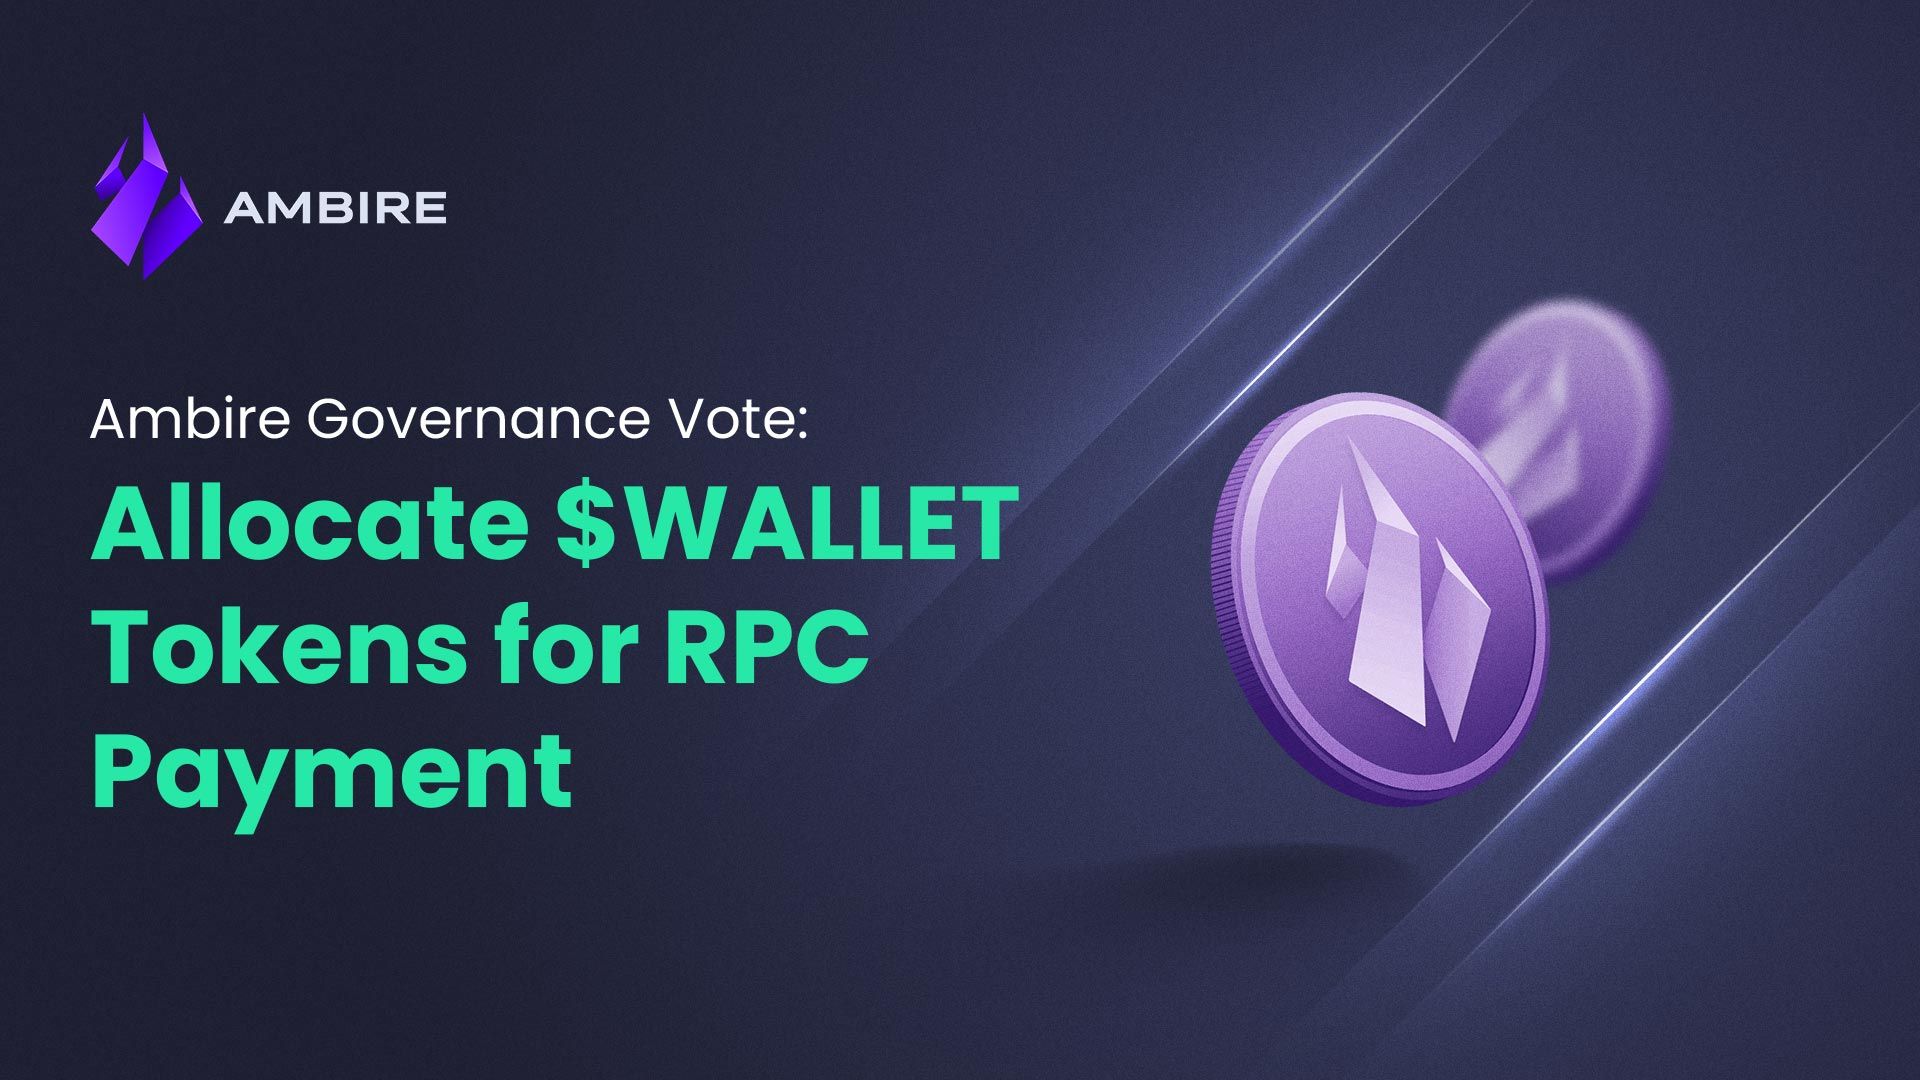 Ambire Governance Vote: Allocate $WALLET Tokens for RPC Payment